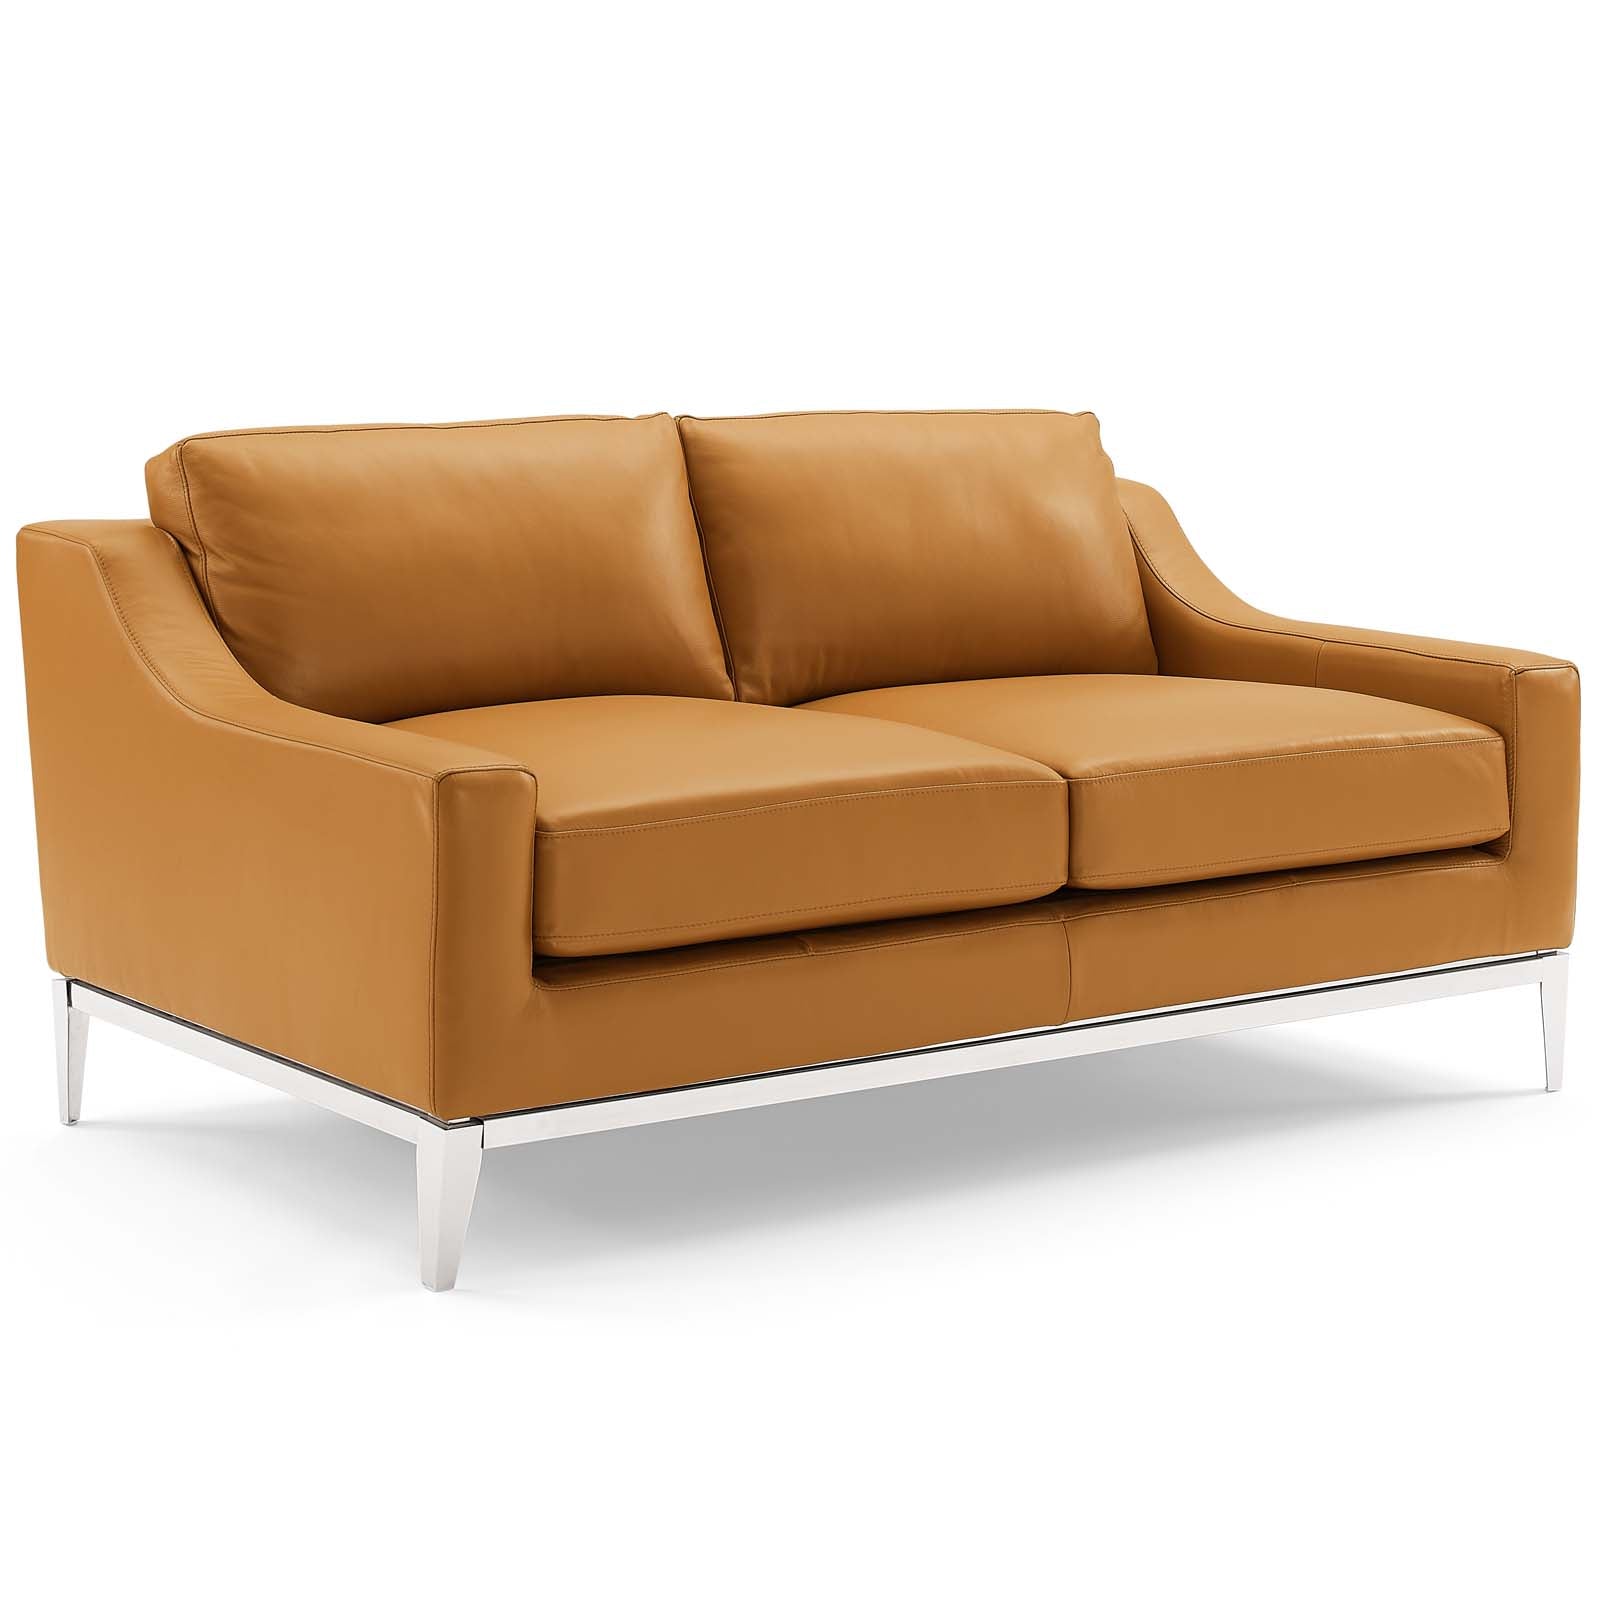 Harness Stainless Steel Base Leather Sofa and Loveseat Set - East Shore Modern Home Furnishings